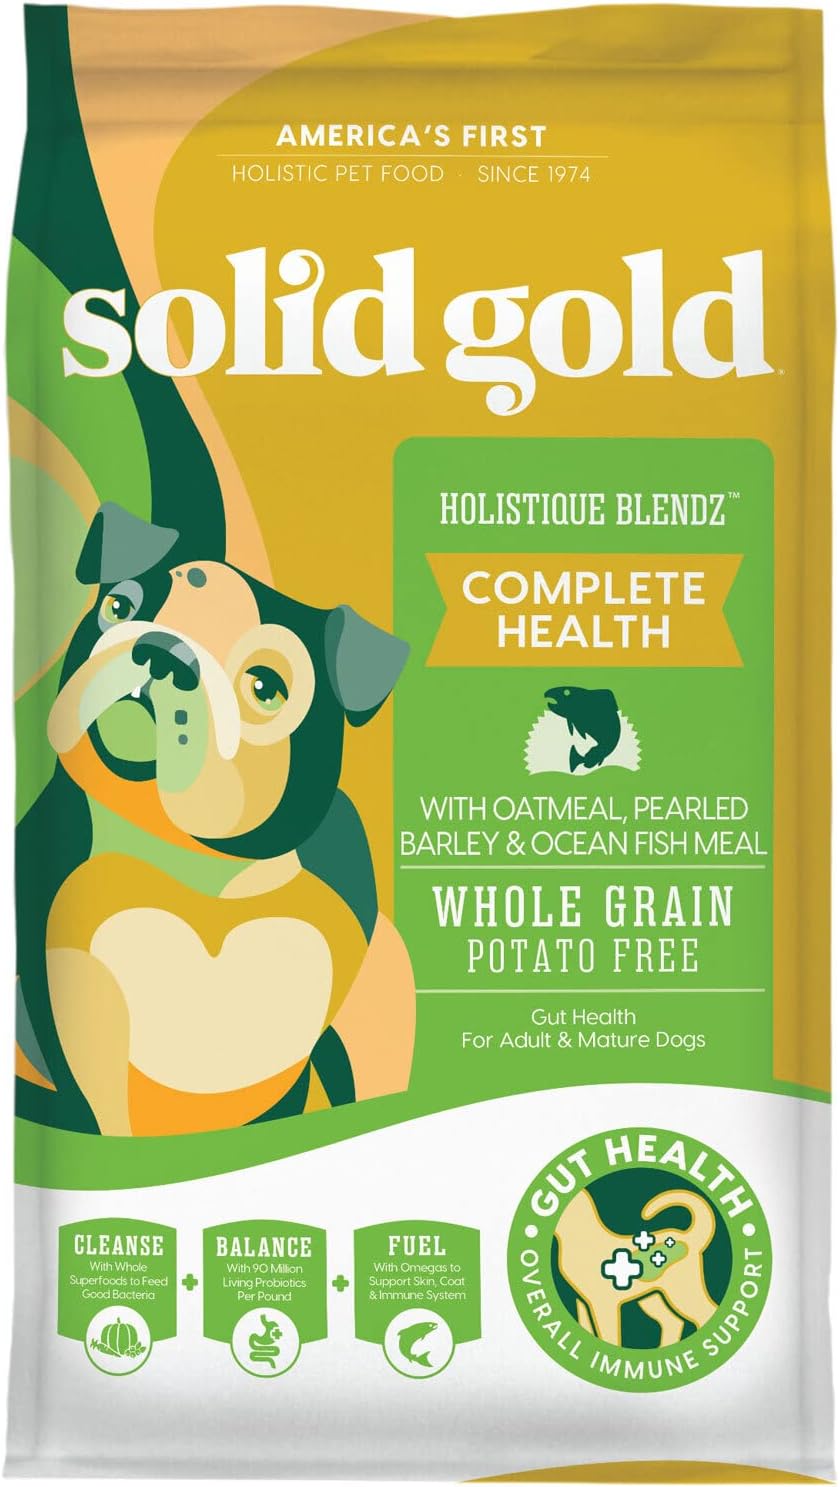 Solid Gold Dry Dog Food for Adult & Senior Dogs - Made with Oatmeal, Pearled Barley, and Fish Meal - Holistique Blendz Potato Free High Fiber Dog Food for Sensitive Stomach & Immune Support - 4 LB